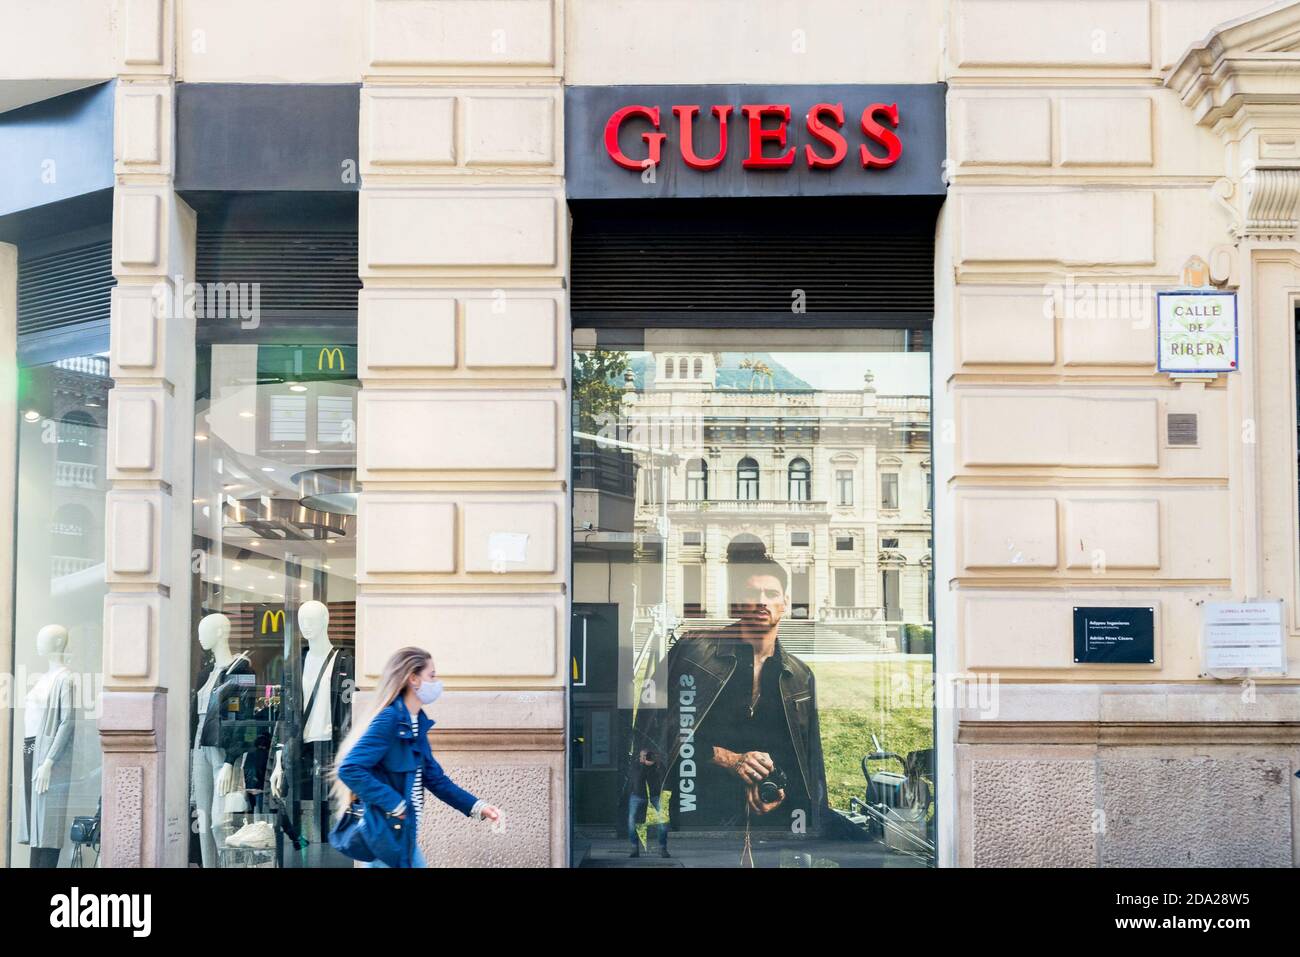 Guess Stores High Resolution Stock Photography and Images - Alamy